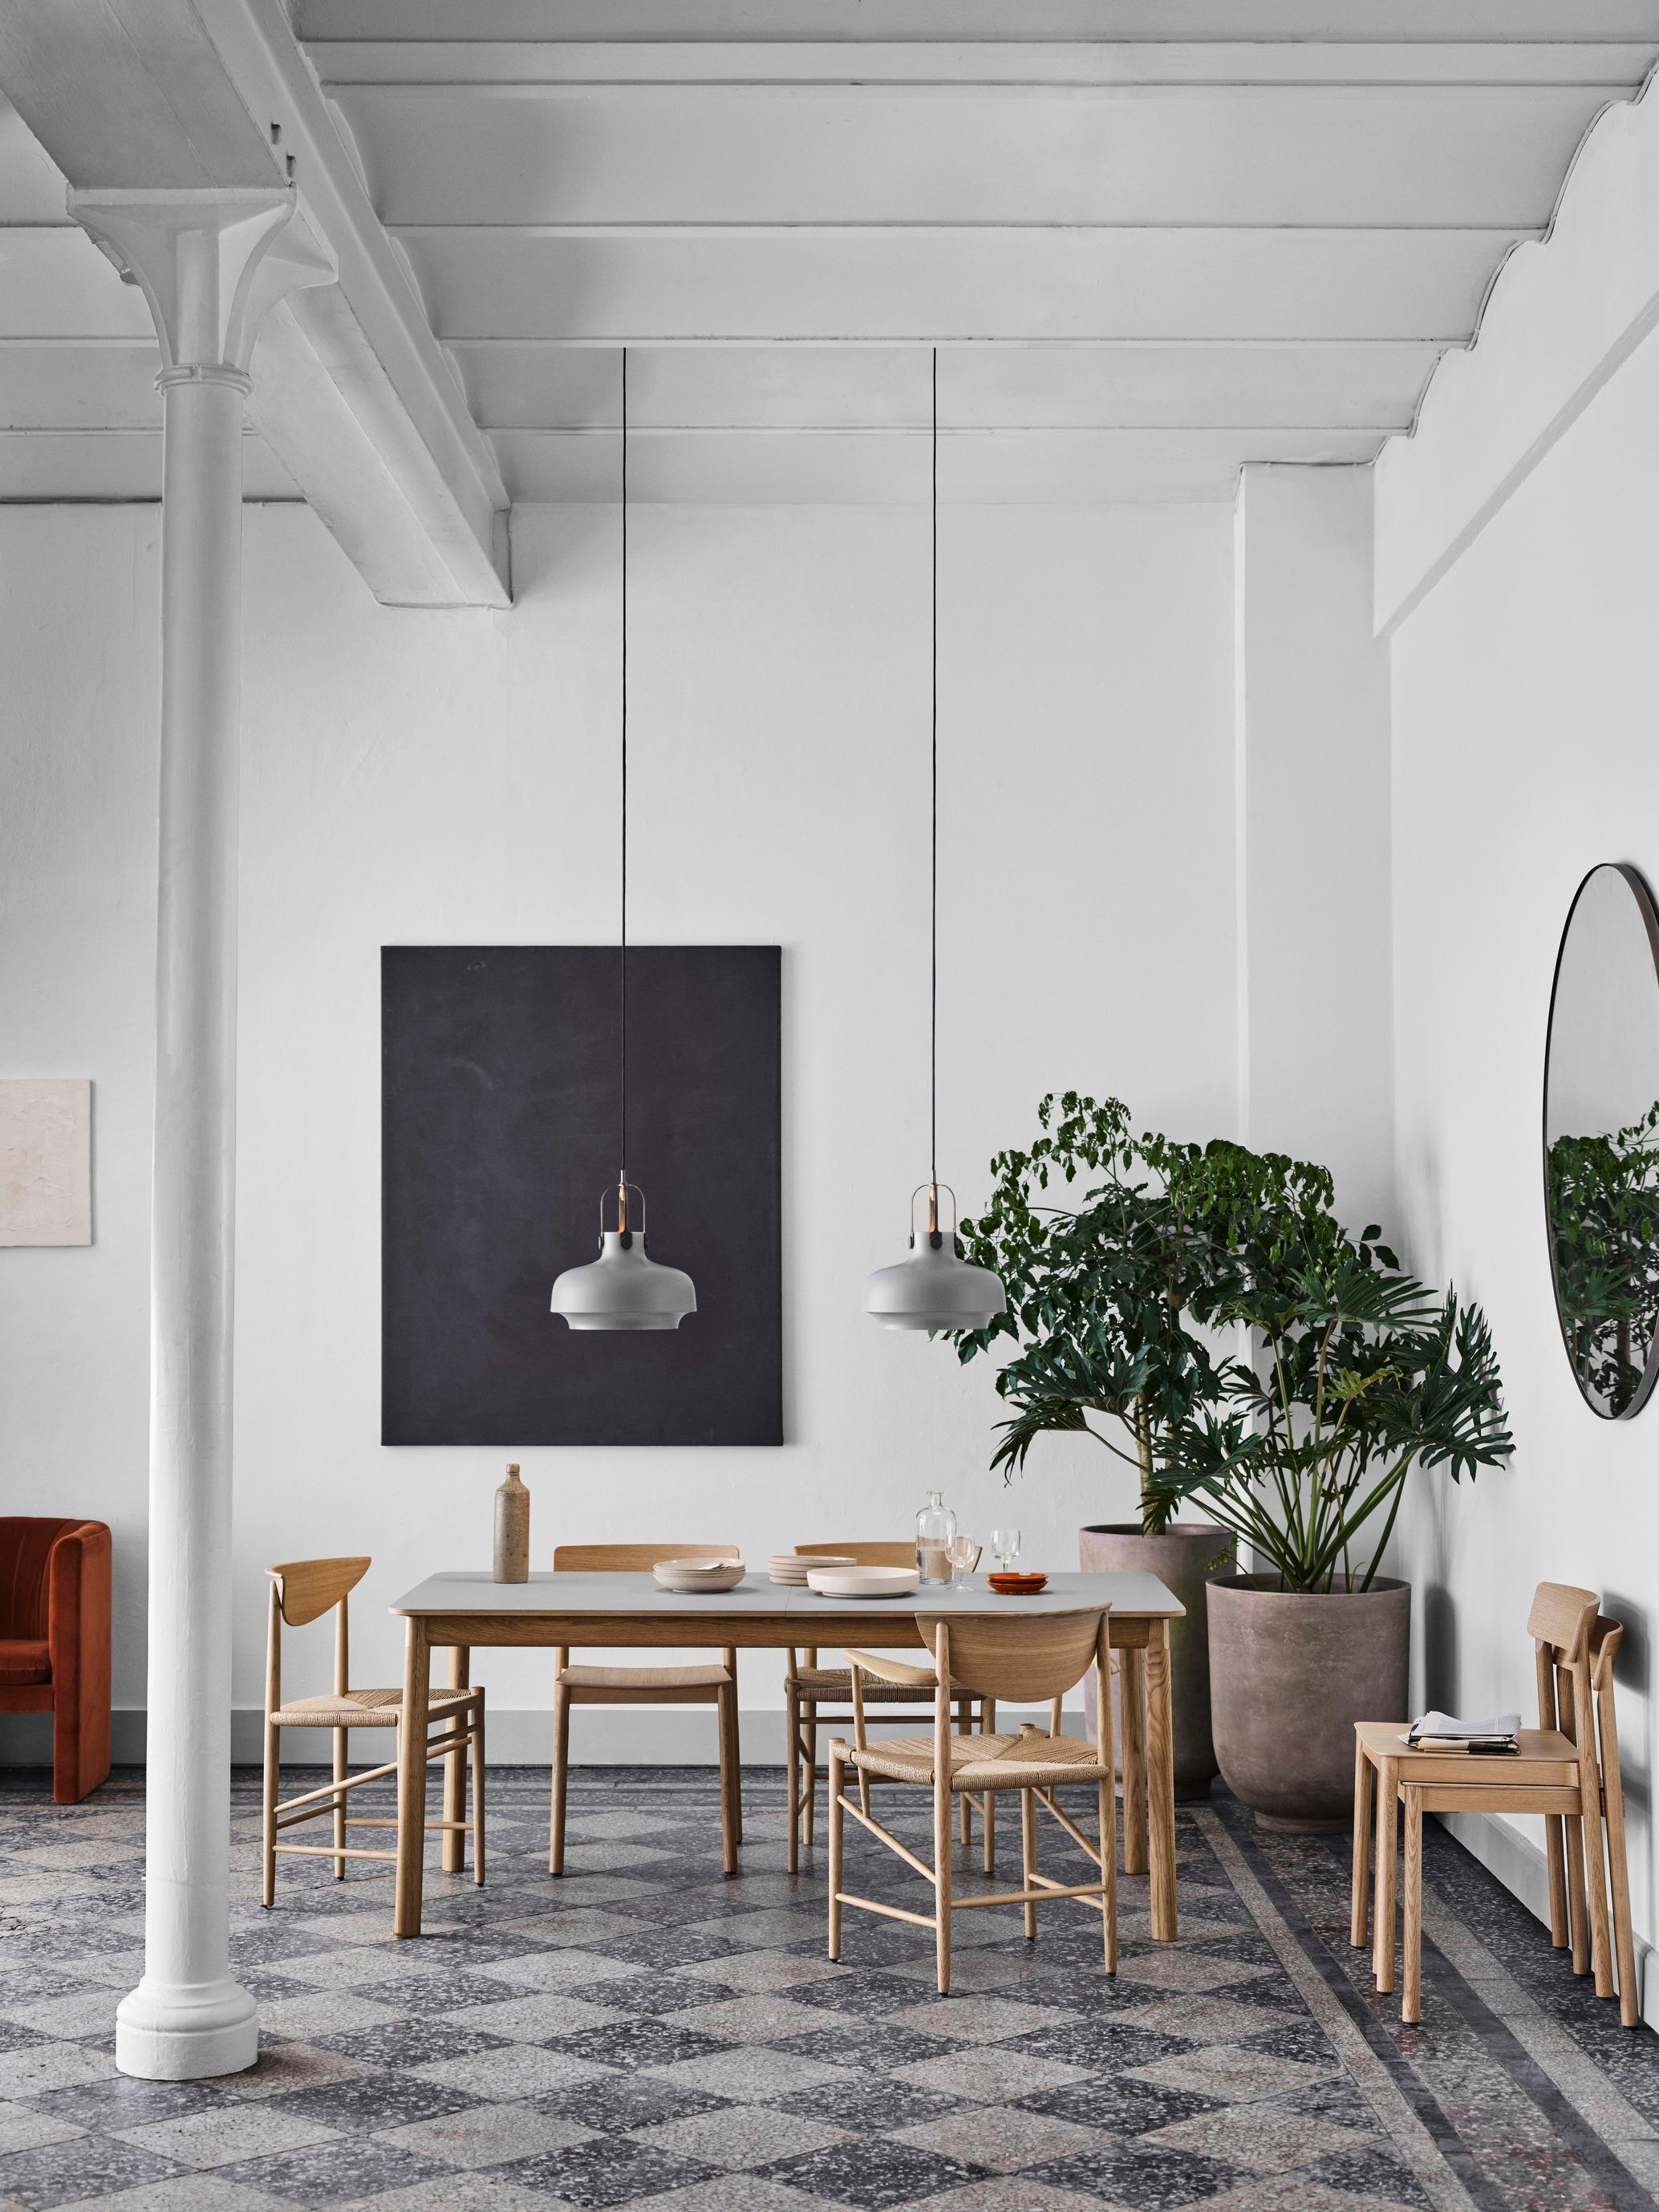 The 1956 Drawn chair by Hvidt & Mølgaard stands out as a definitive piece of Danish design.
 Relying upon traditional craftsmanship techniques and built out of organic materials, it brings a sense of wholesome honesty to any space. 
It comes in